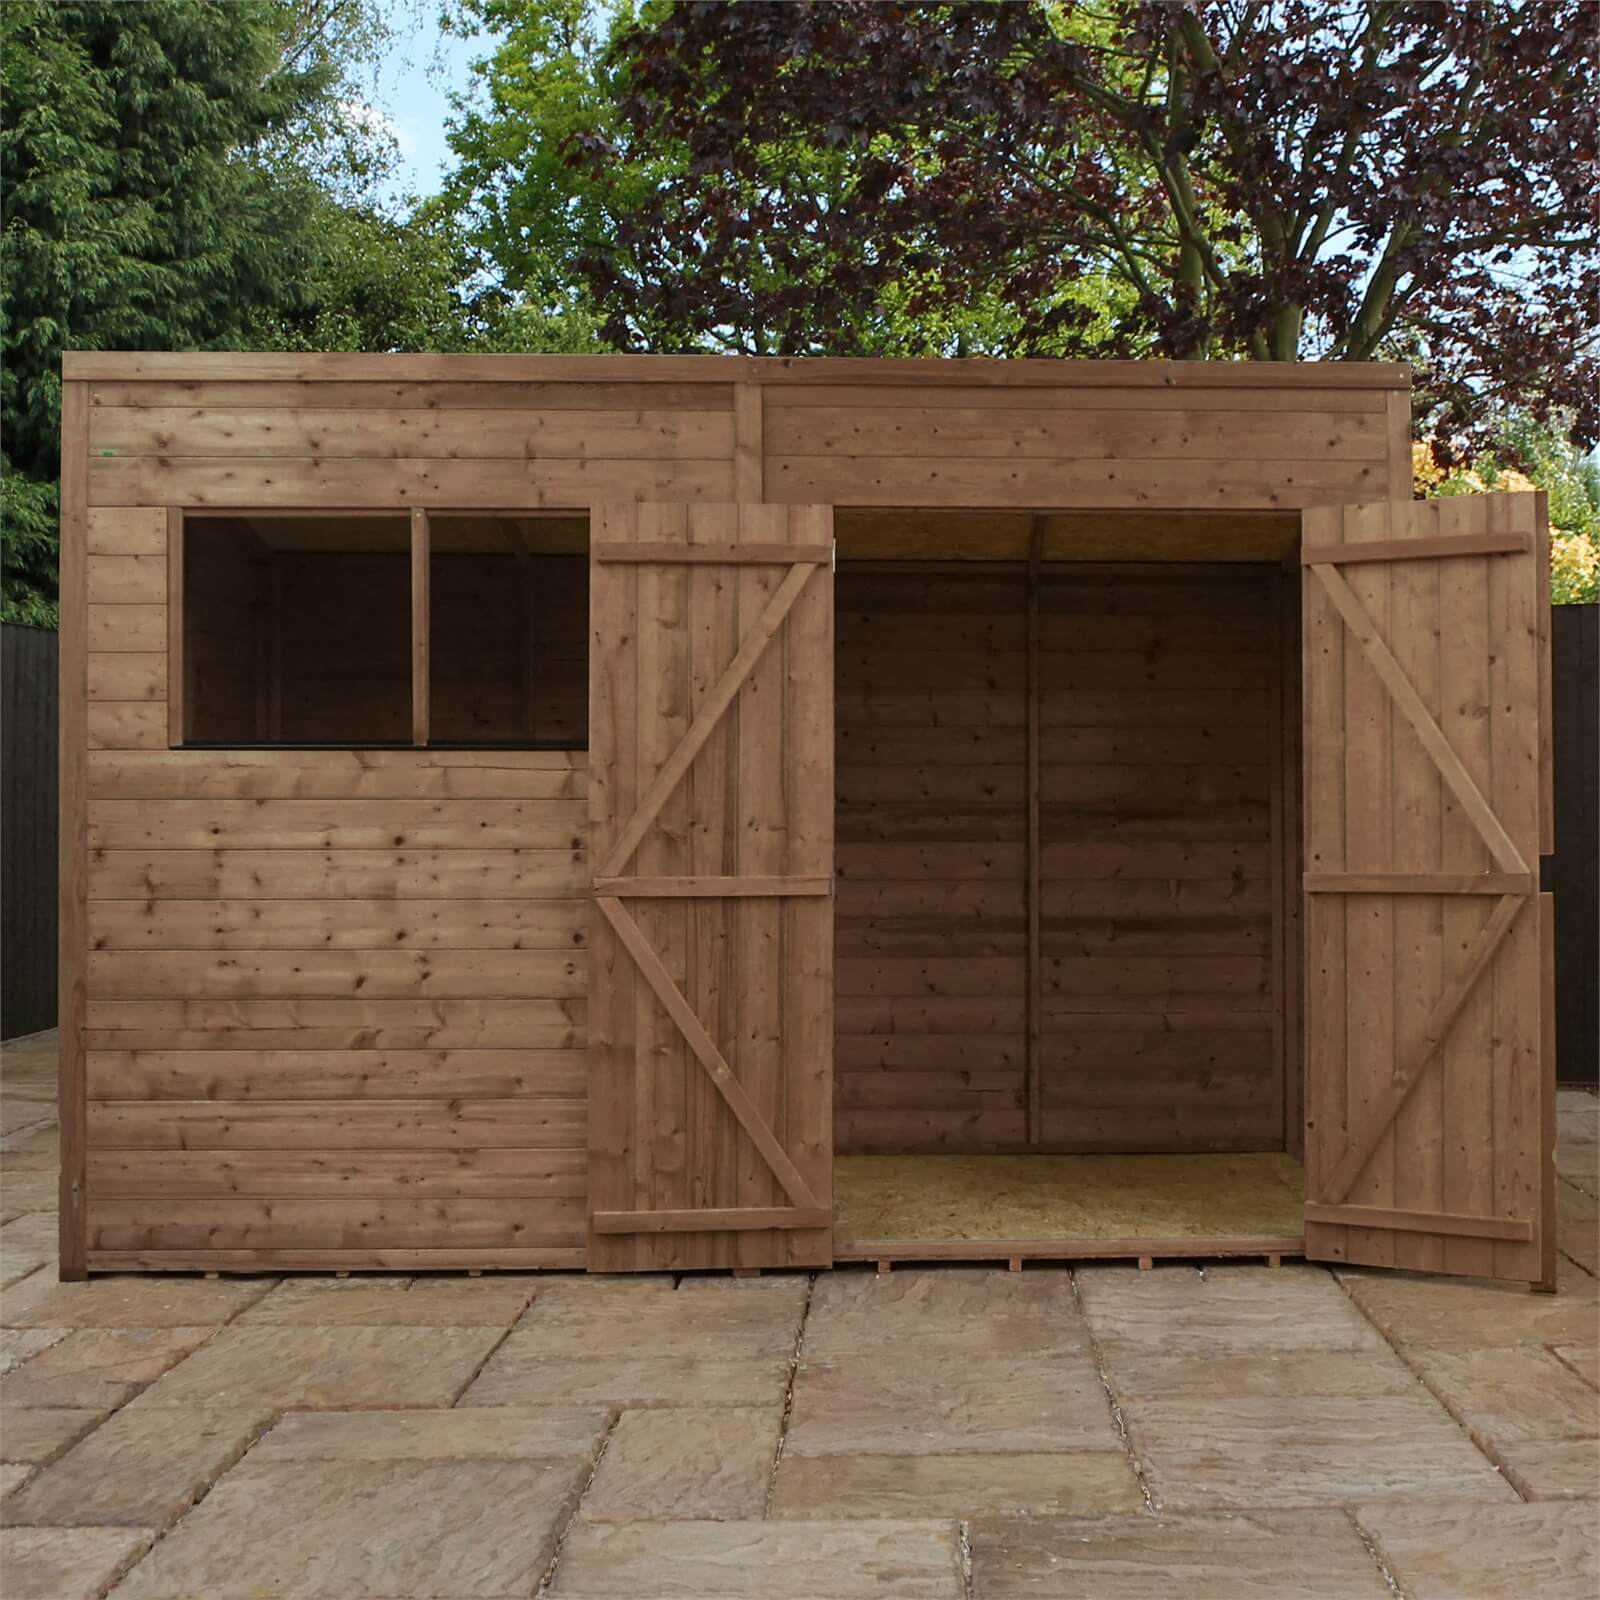 Mercia (Installation Included) 10x6ft Pressure Treated Pent Shed